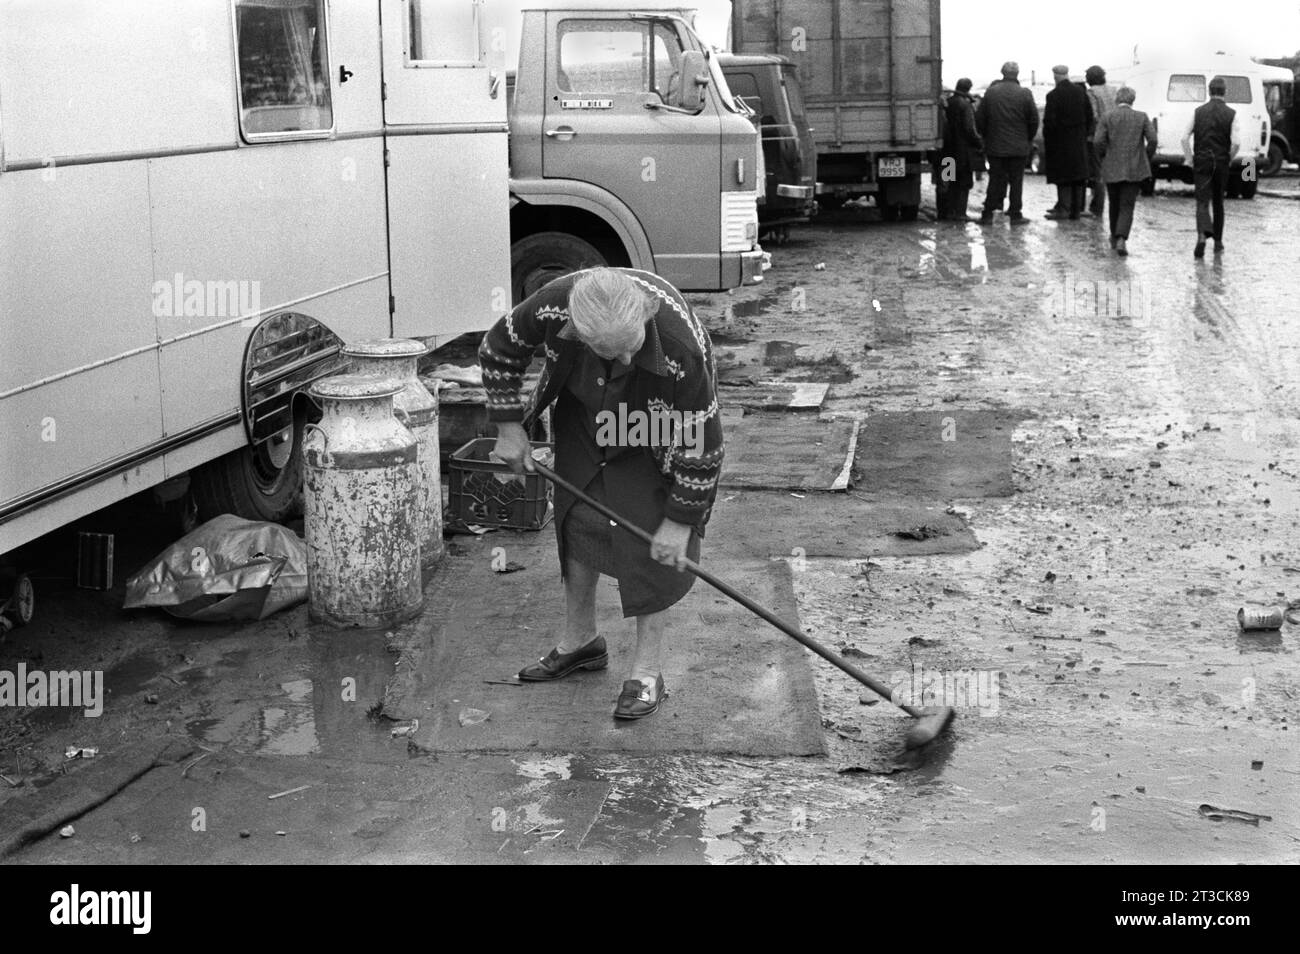 Appleby in Westmorland gypsy horse fair Cumbria, England June 1981. House proud older woman trying to keep her caravan, her home clean after heavy rain fall 1980s UK HOMER SYKES Stock Photo